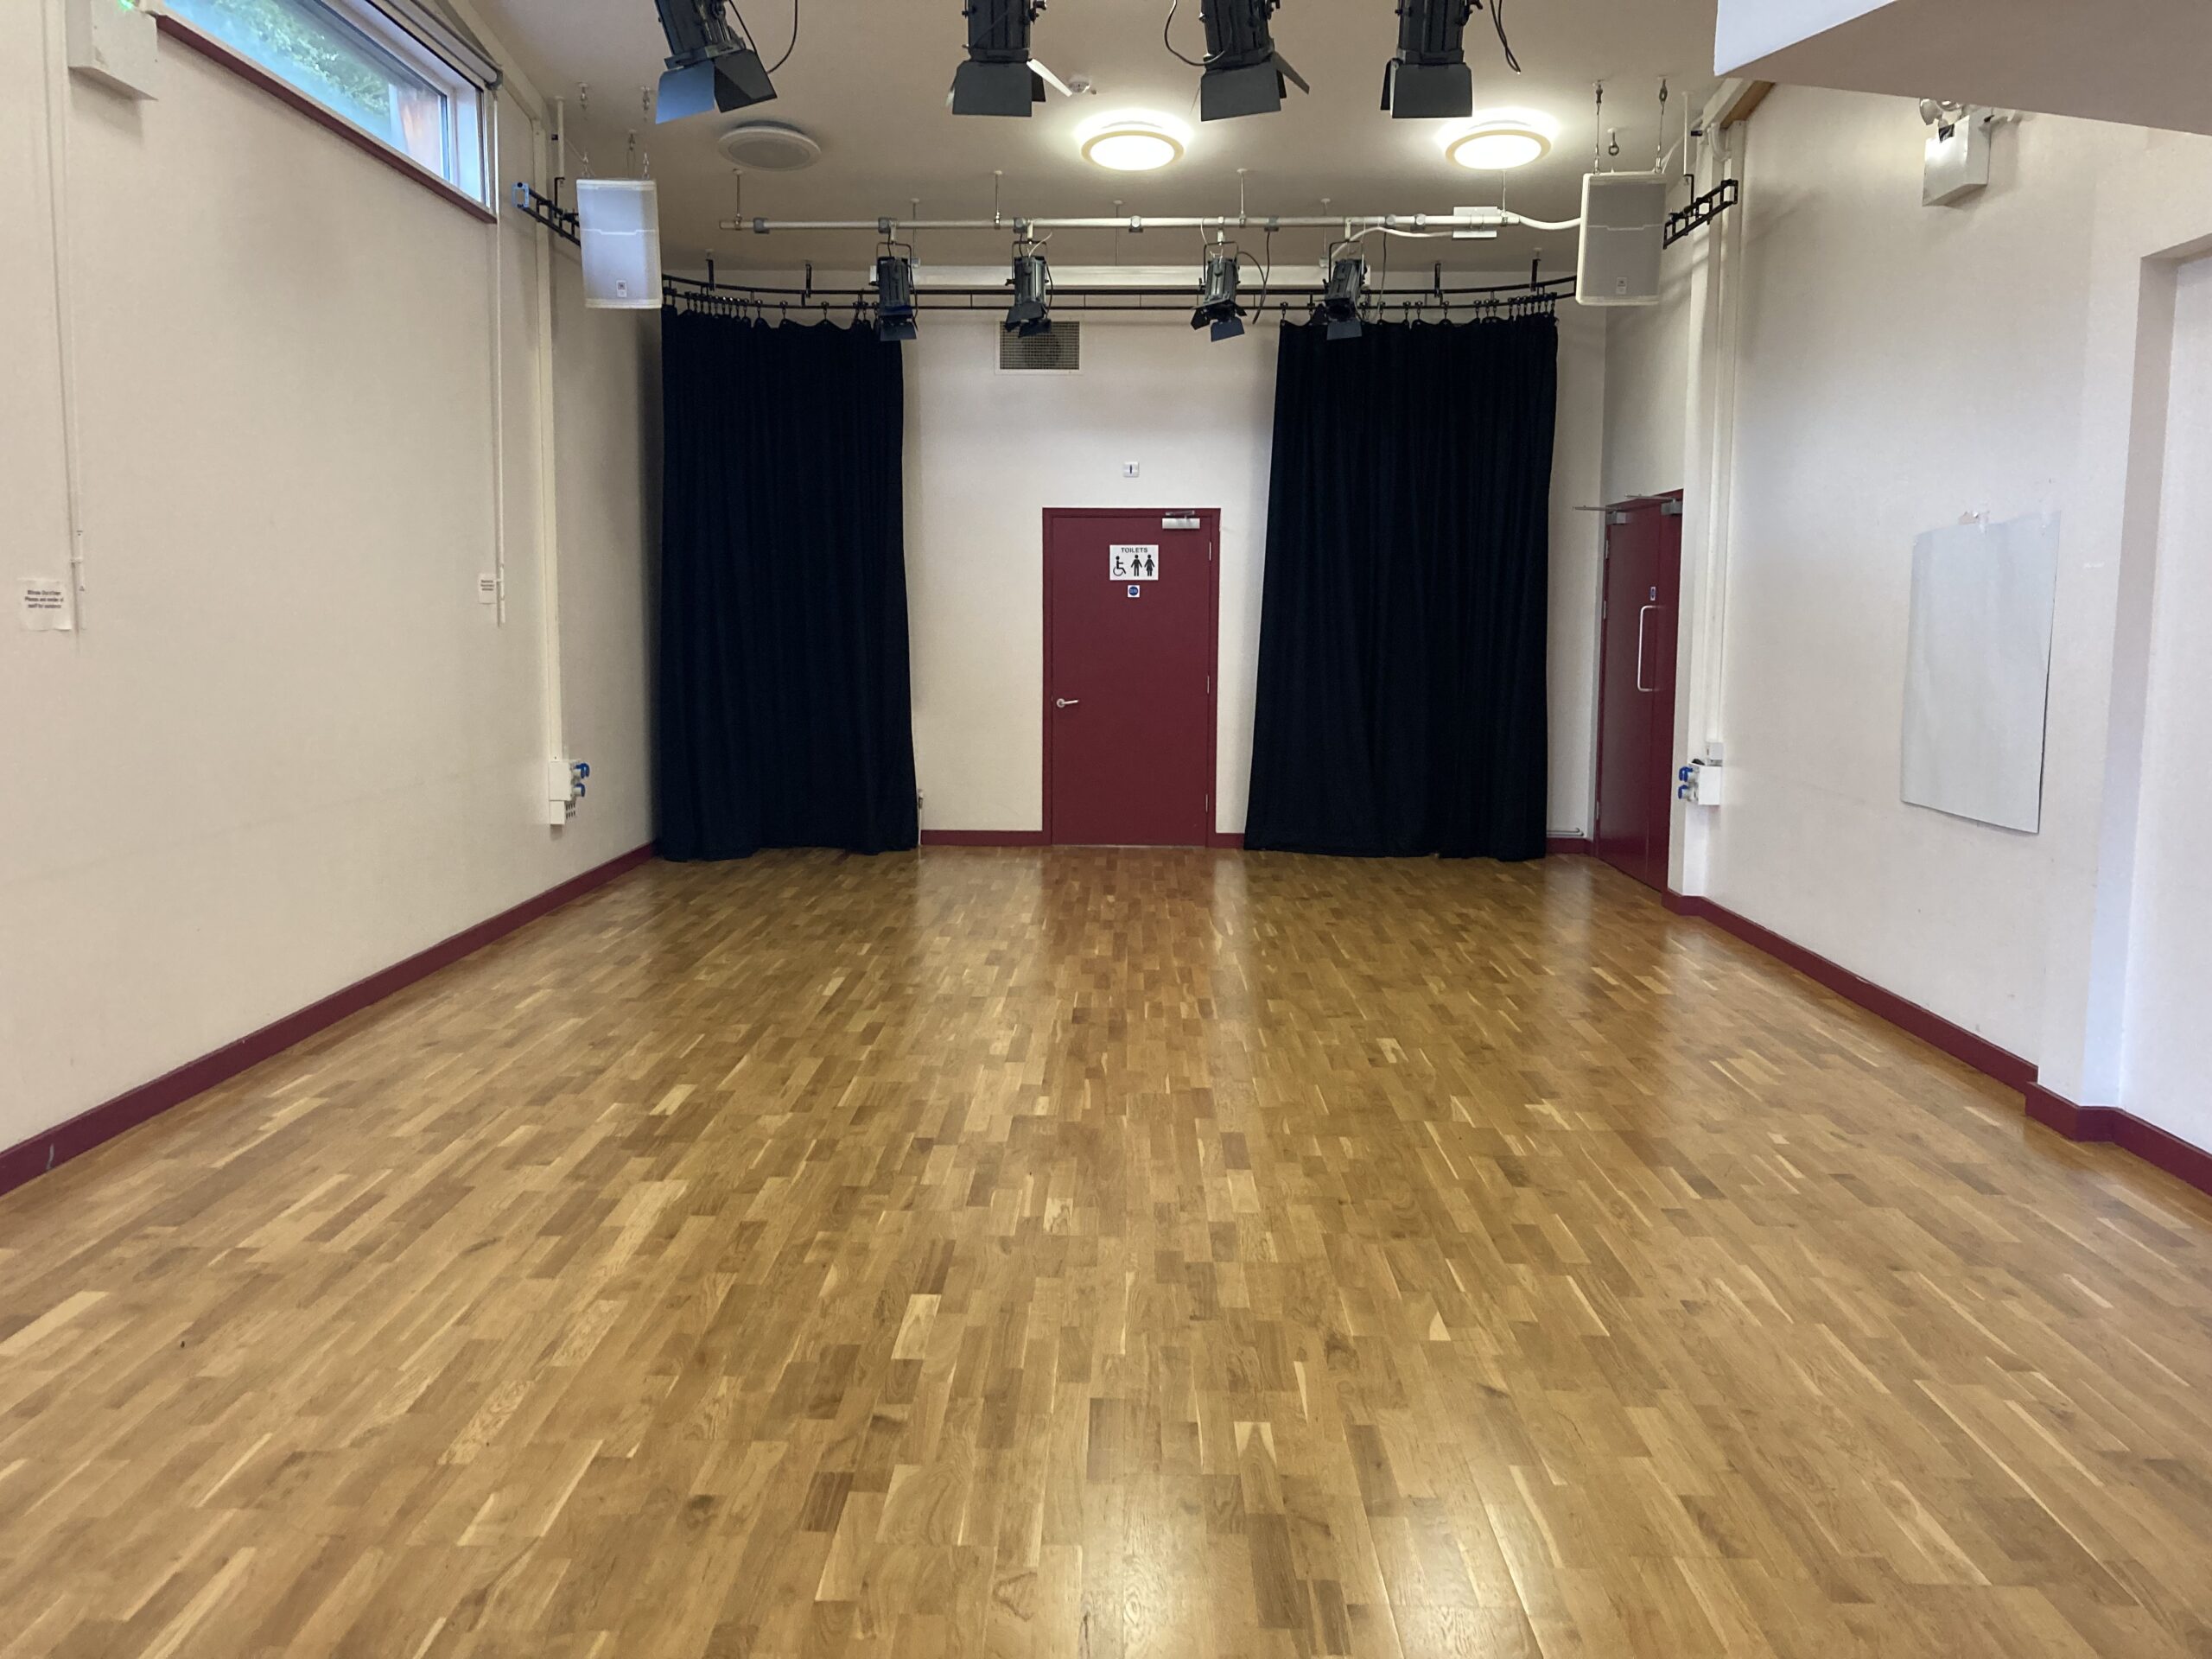 An empty studio room - the floor is wood and the walls are white